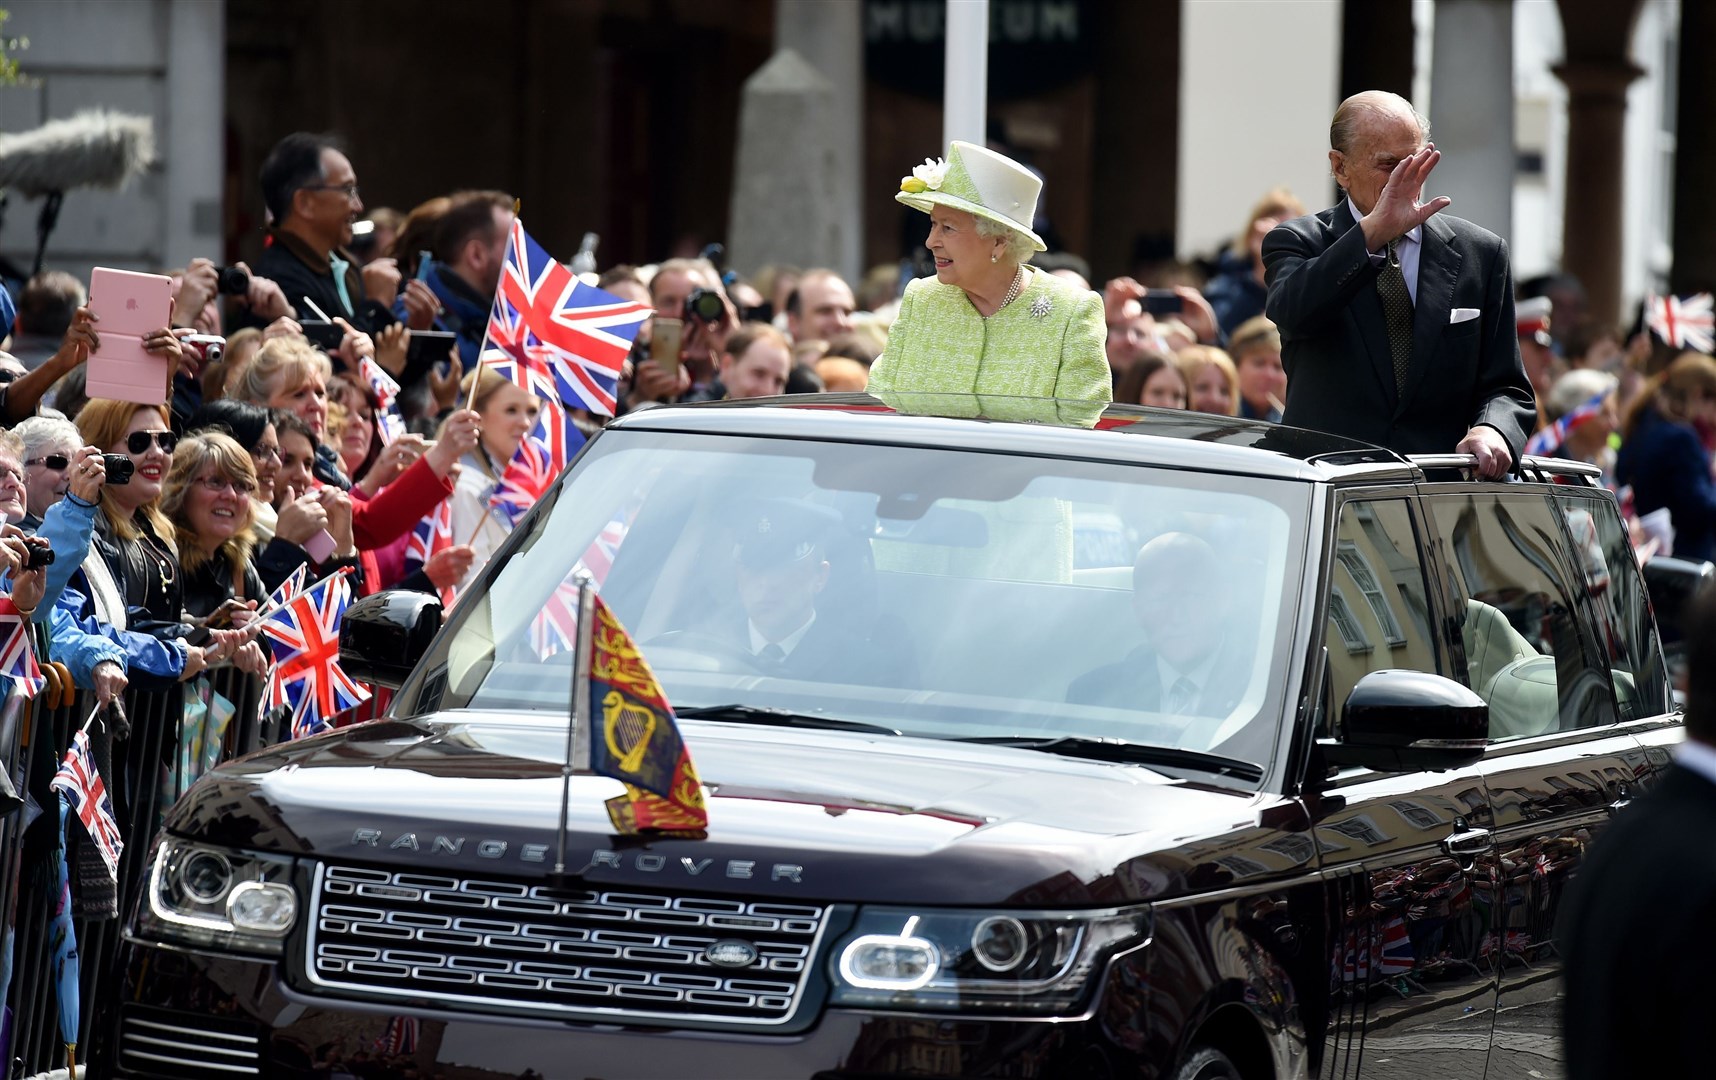 The Queen waves to well wishers from a open top Range Rover for her 90th birthday celebrations (Andrew Matthews/PA)